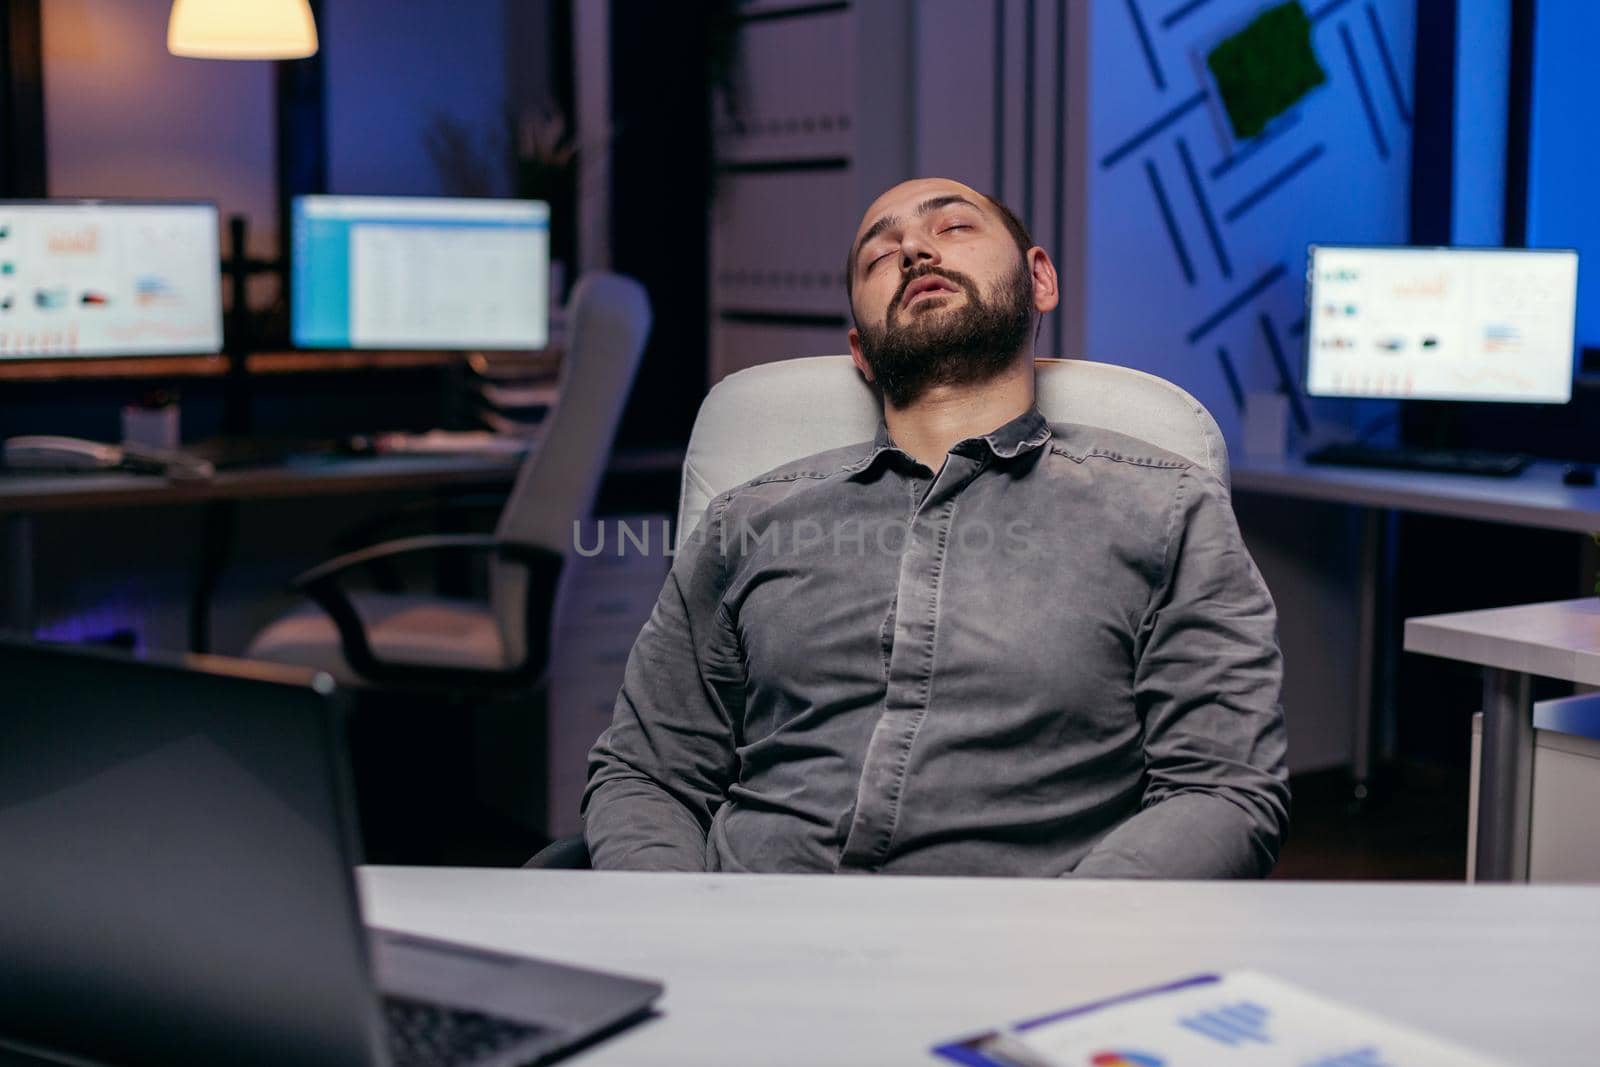 Overworked exhausted man sleeps on chair in empty office. Workaholic employee falling asleep because of while working late at night alone in the office for important company project.